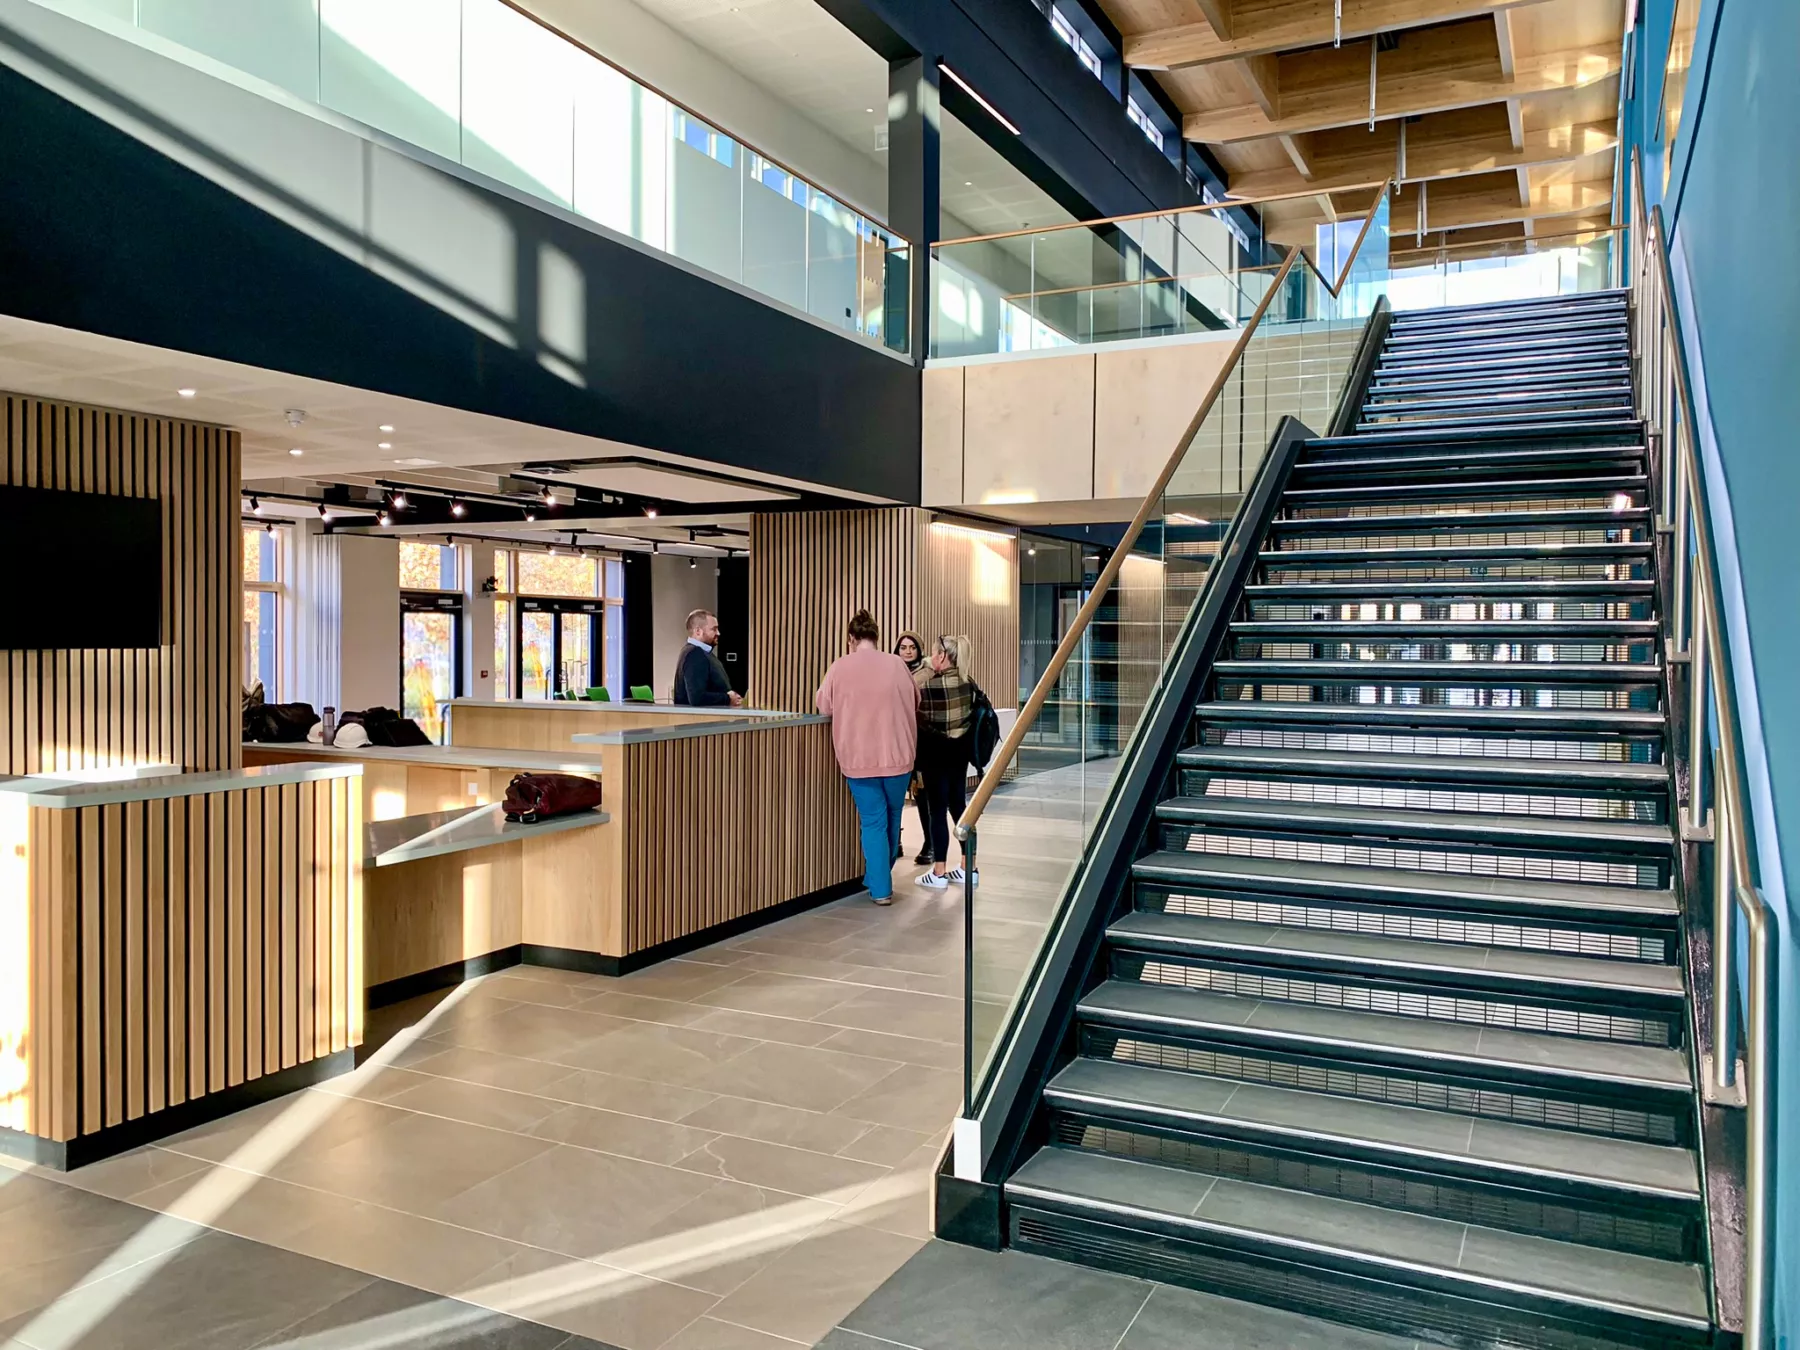 Internal photograph of the Rural and Veterinary Innovation Centre, showing people at reception desk on left-hand side and stairs up to first floor level on right.